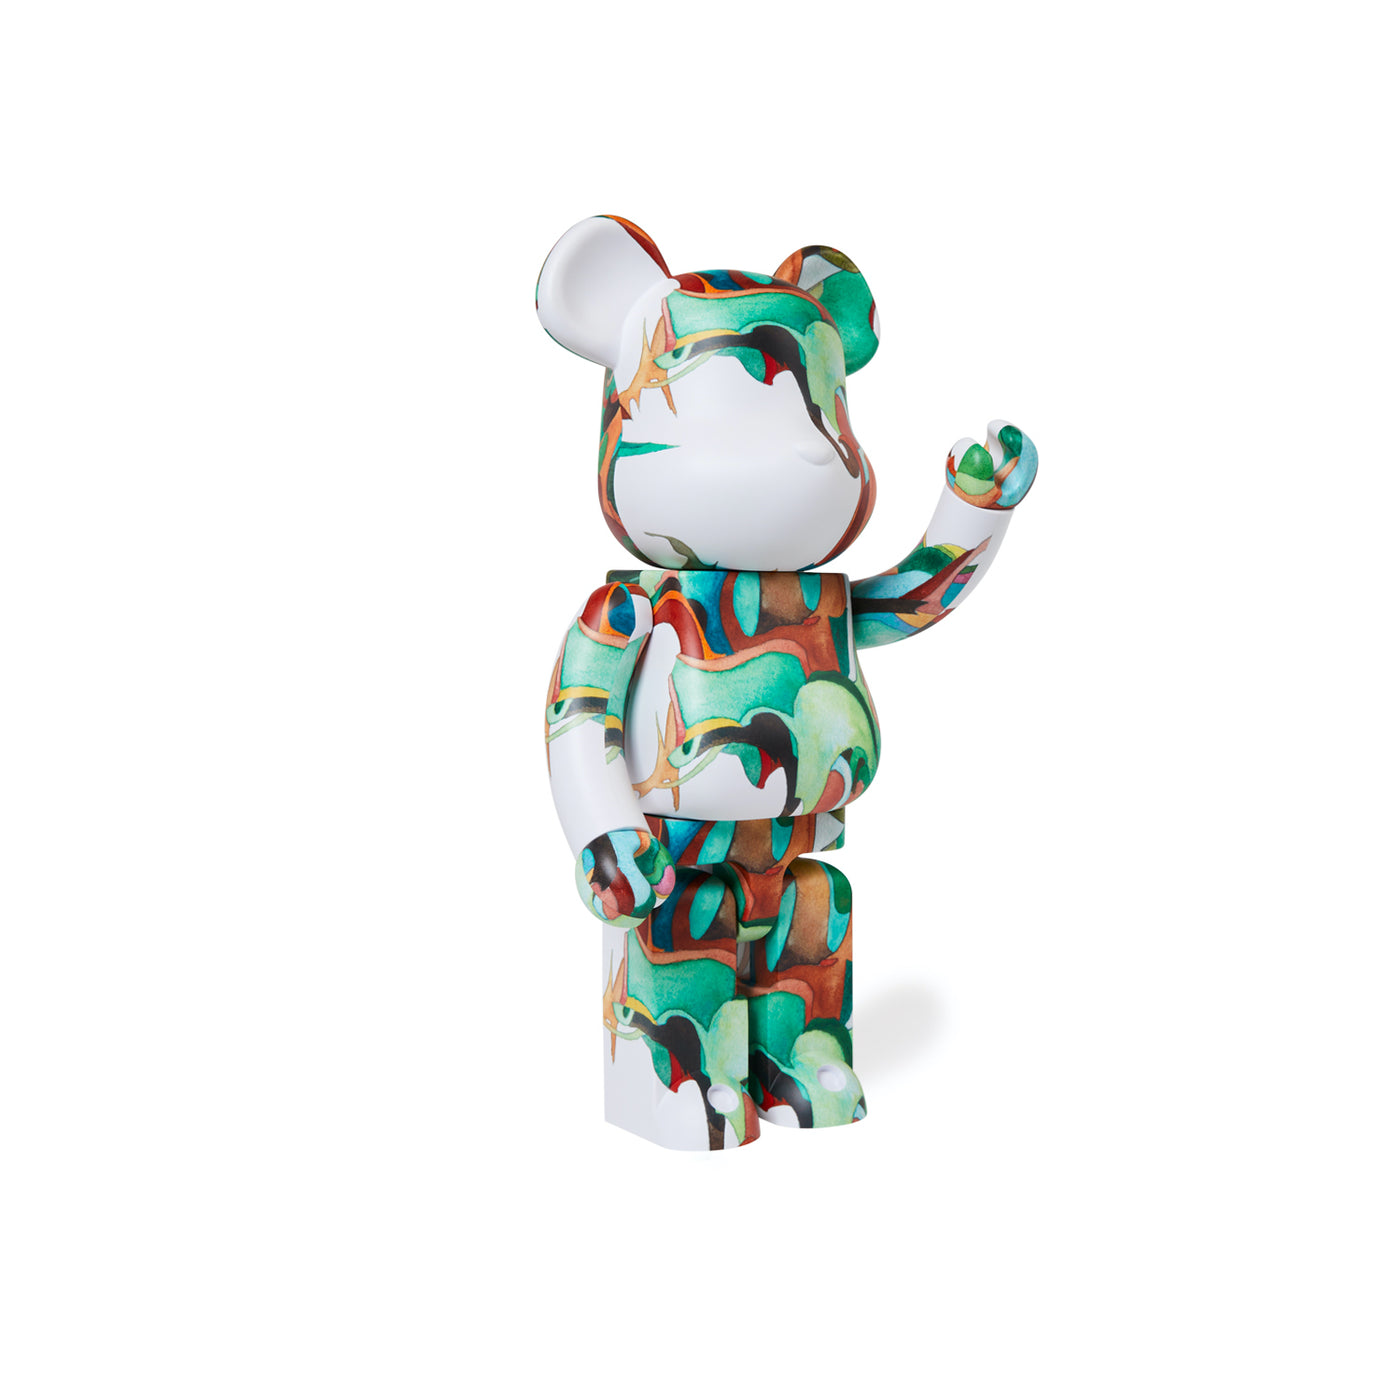 BE@RBRICK Nujabes "metaphorical music"